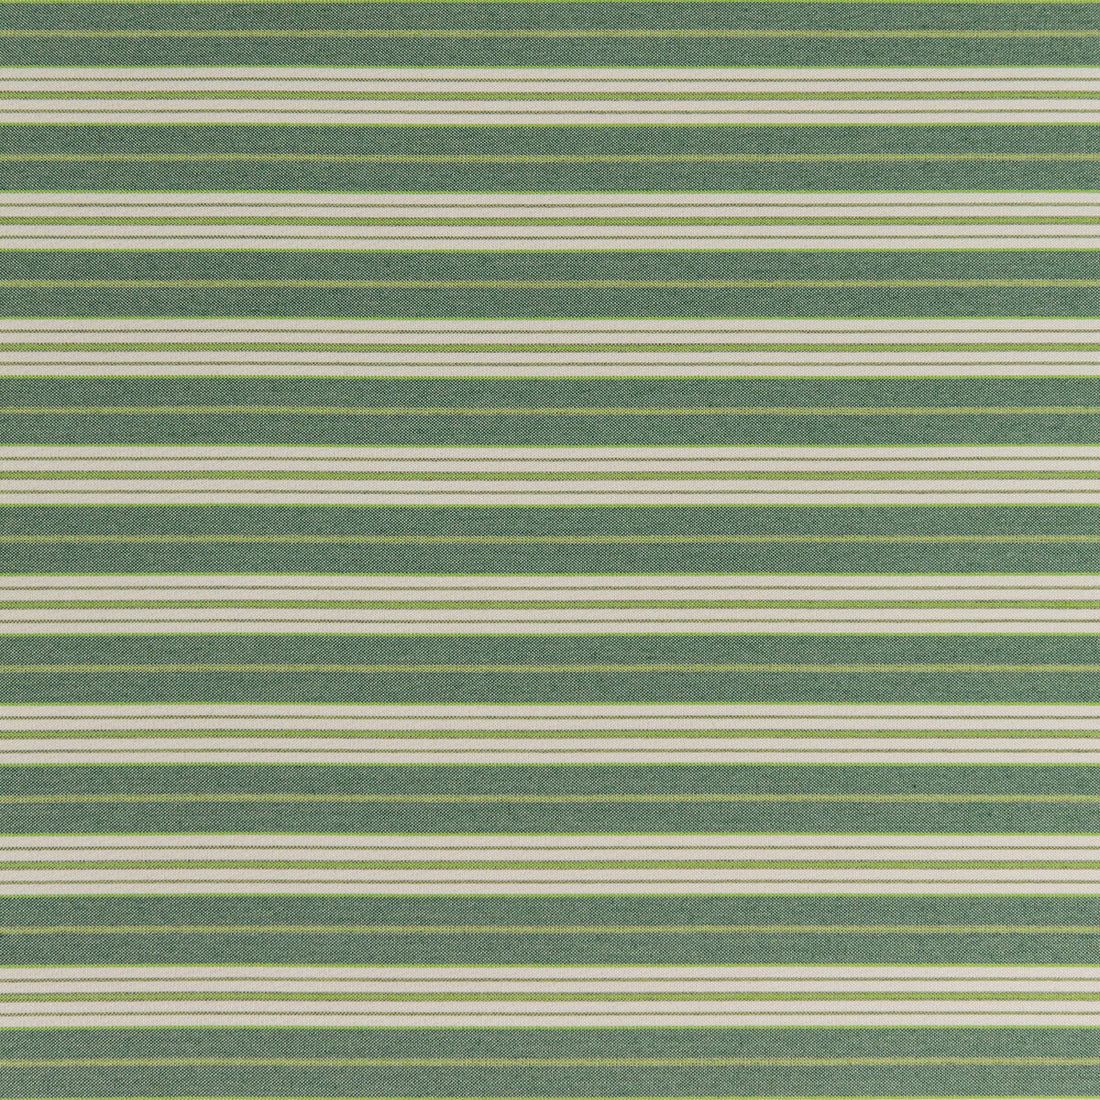 Hull Stripe fabric in clover color - pattern 35827.3.0 - by Kravet Design in the Indoor / Outdoor collection